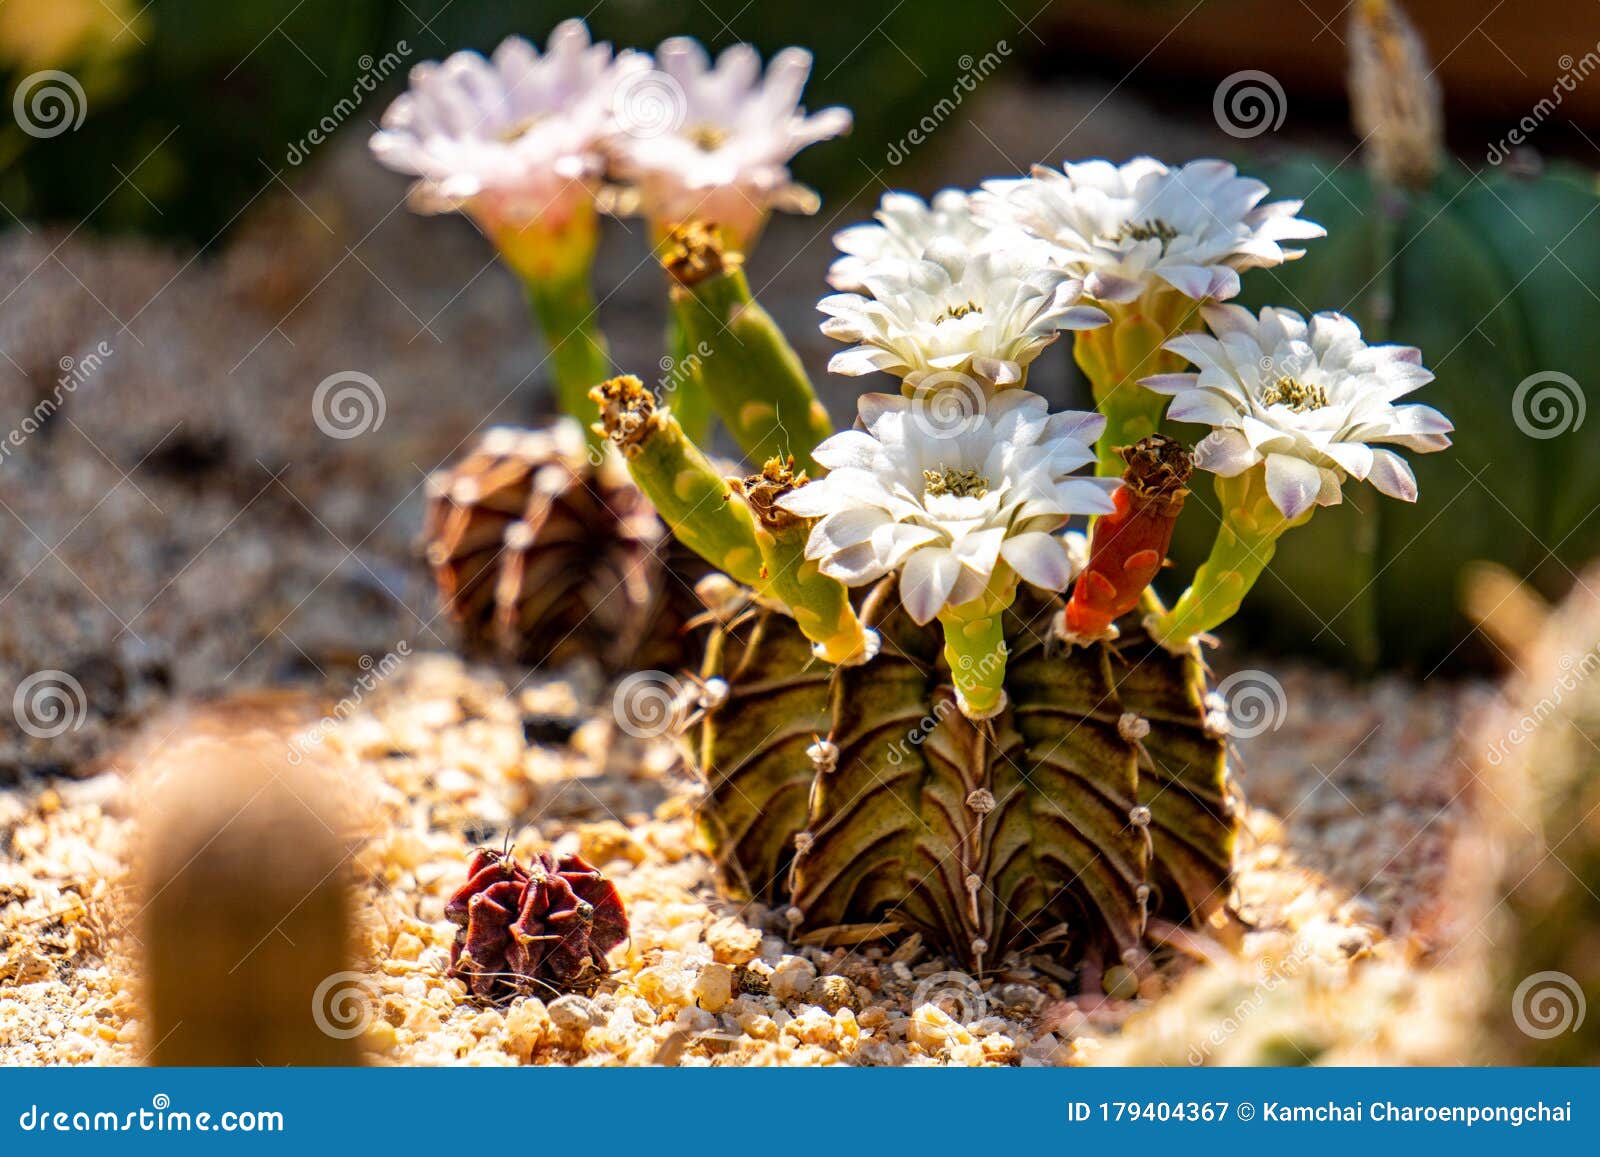 blooming flowers and unripe seed pods of gymnocalycium mihanovichii lb2178 agua dulce hybrid  cactus